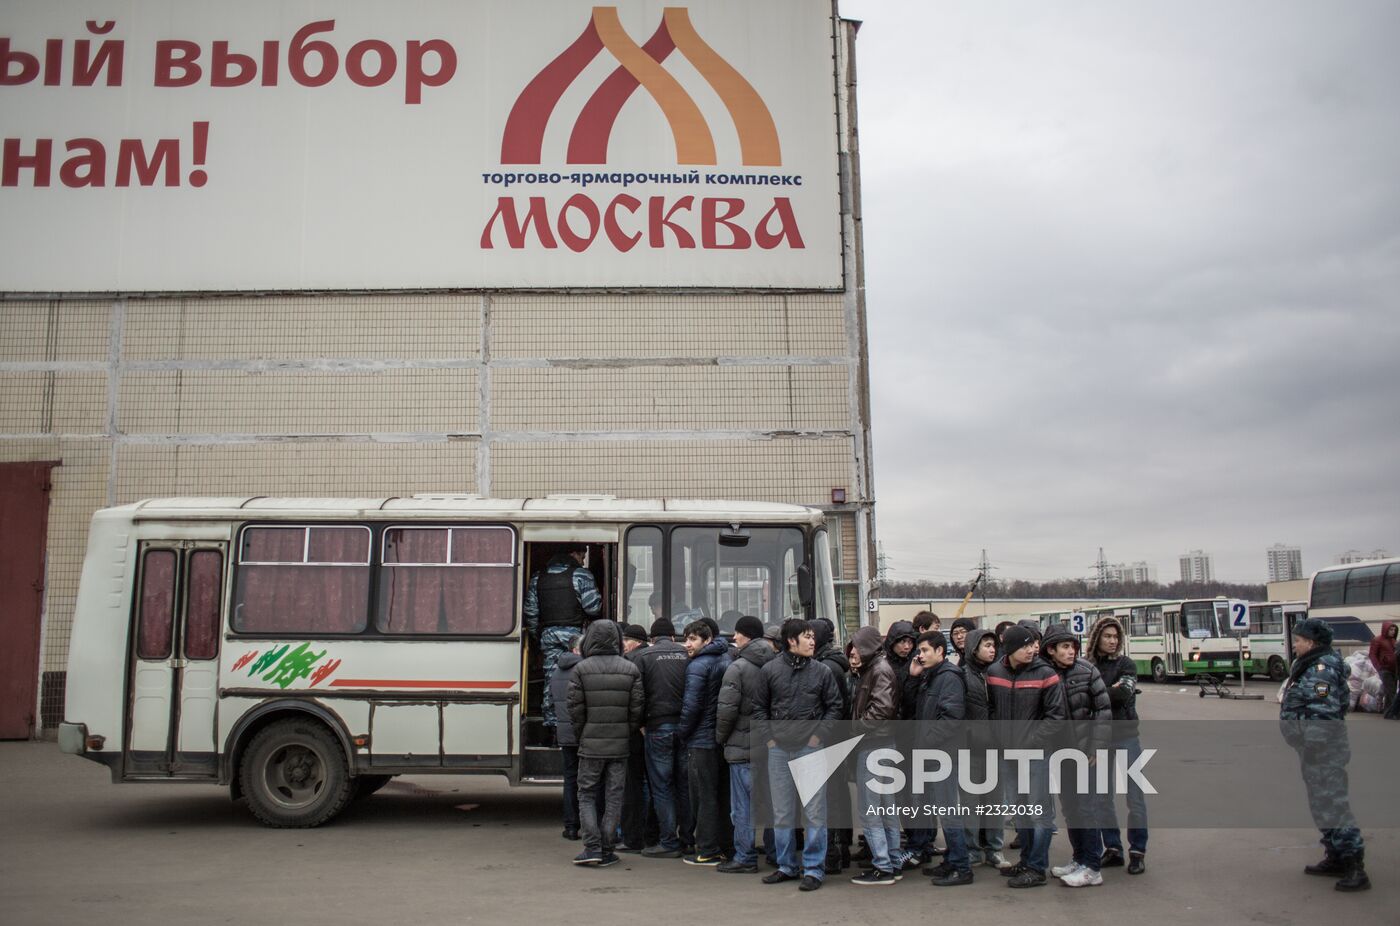 Police conduct immigration checks at Moscow shopping center in Lublino